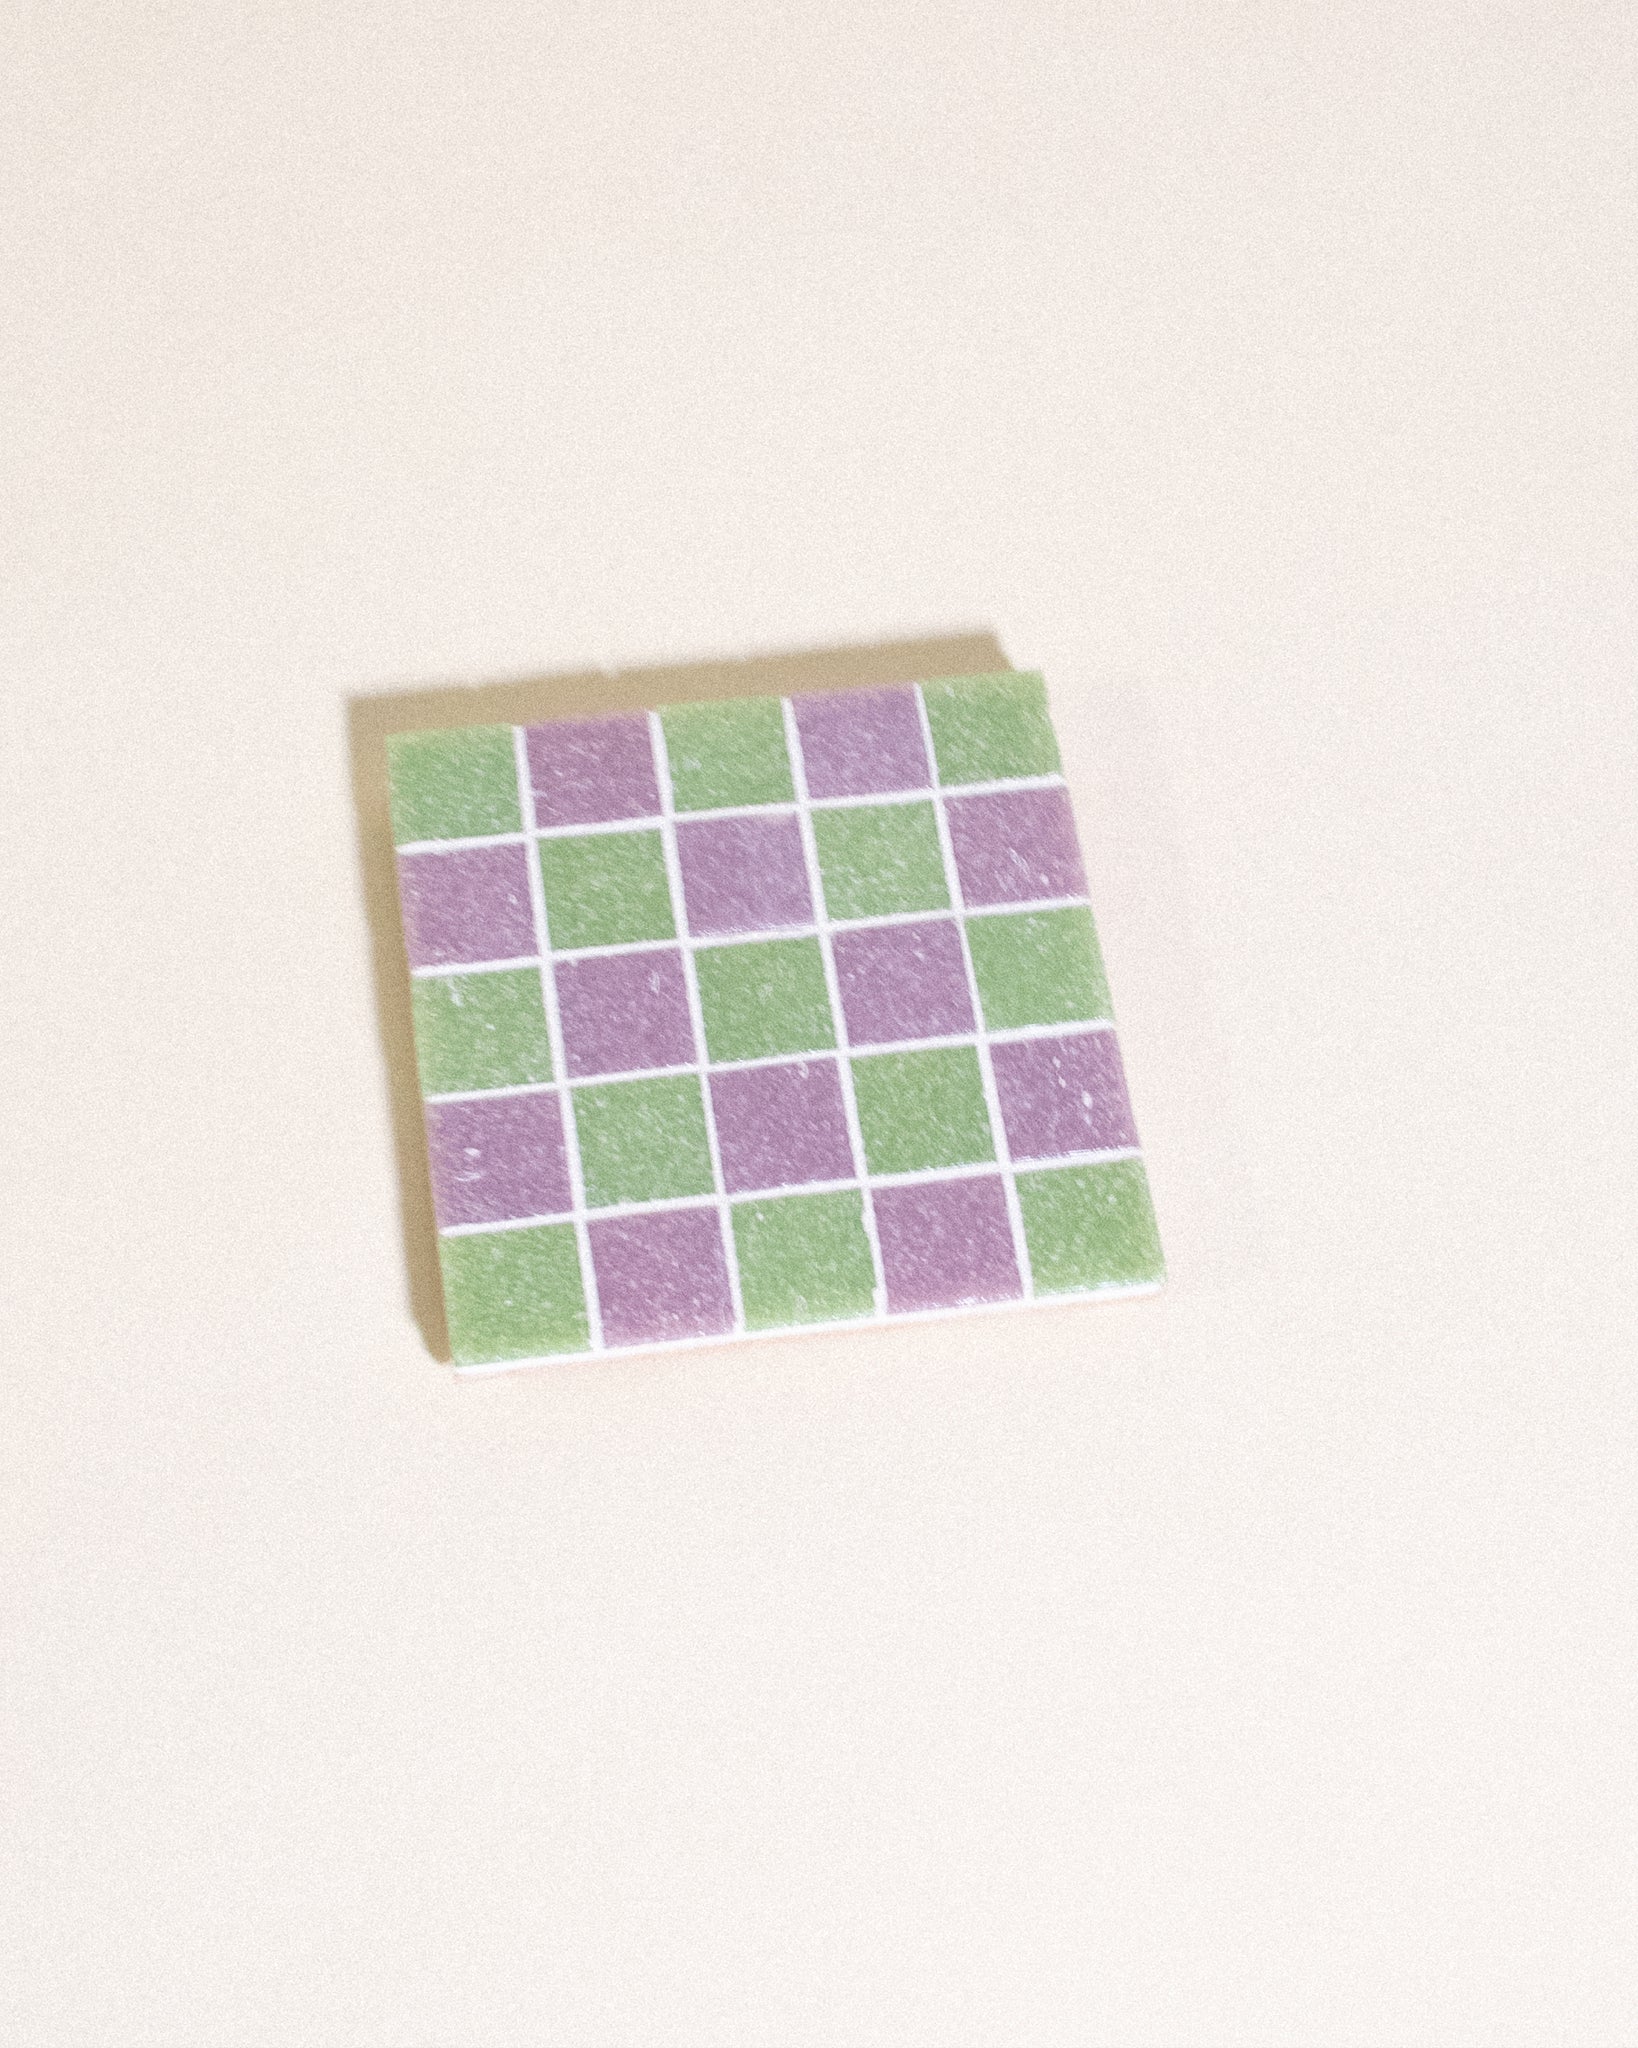 GLASS TILE COASTER - Sour Patch Candy - 13